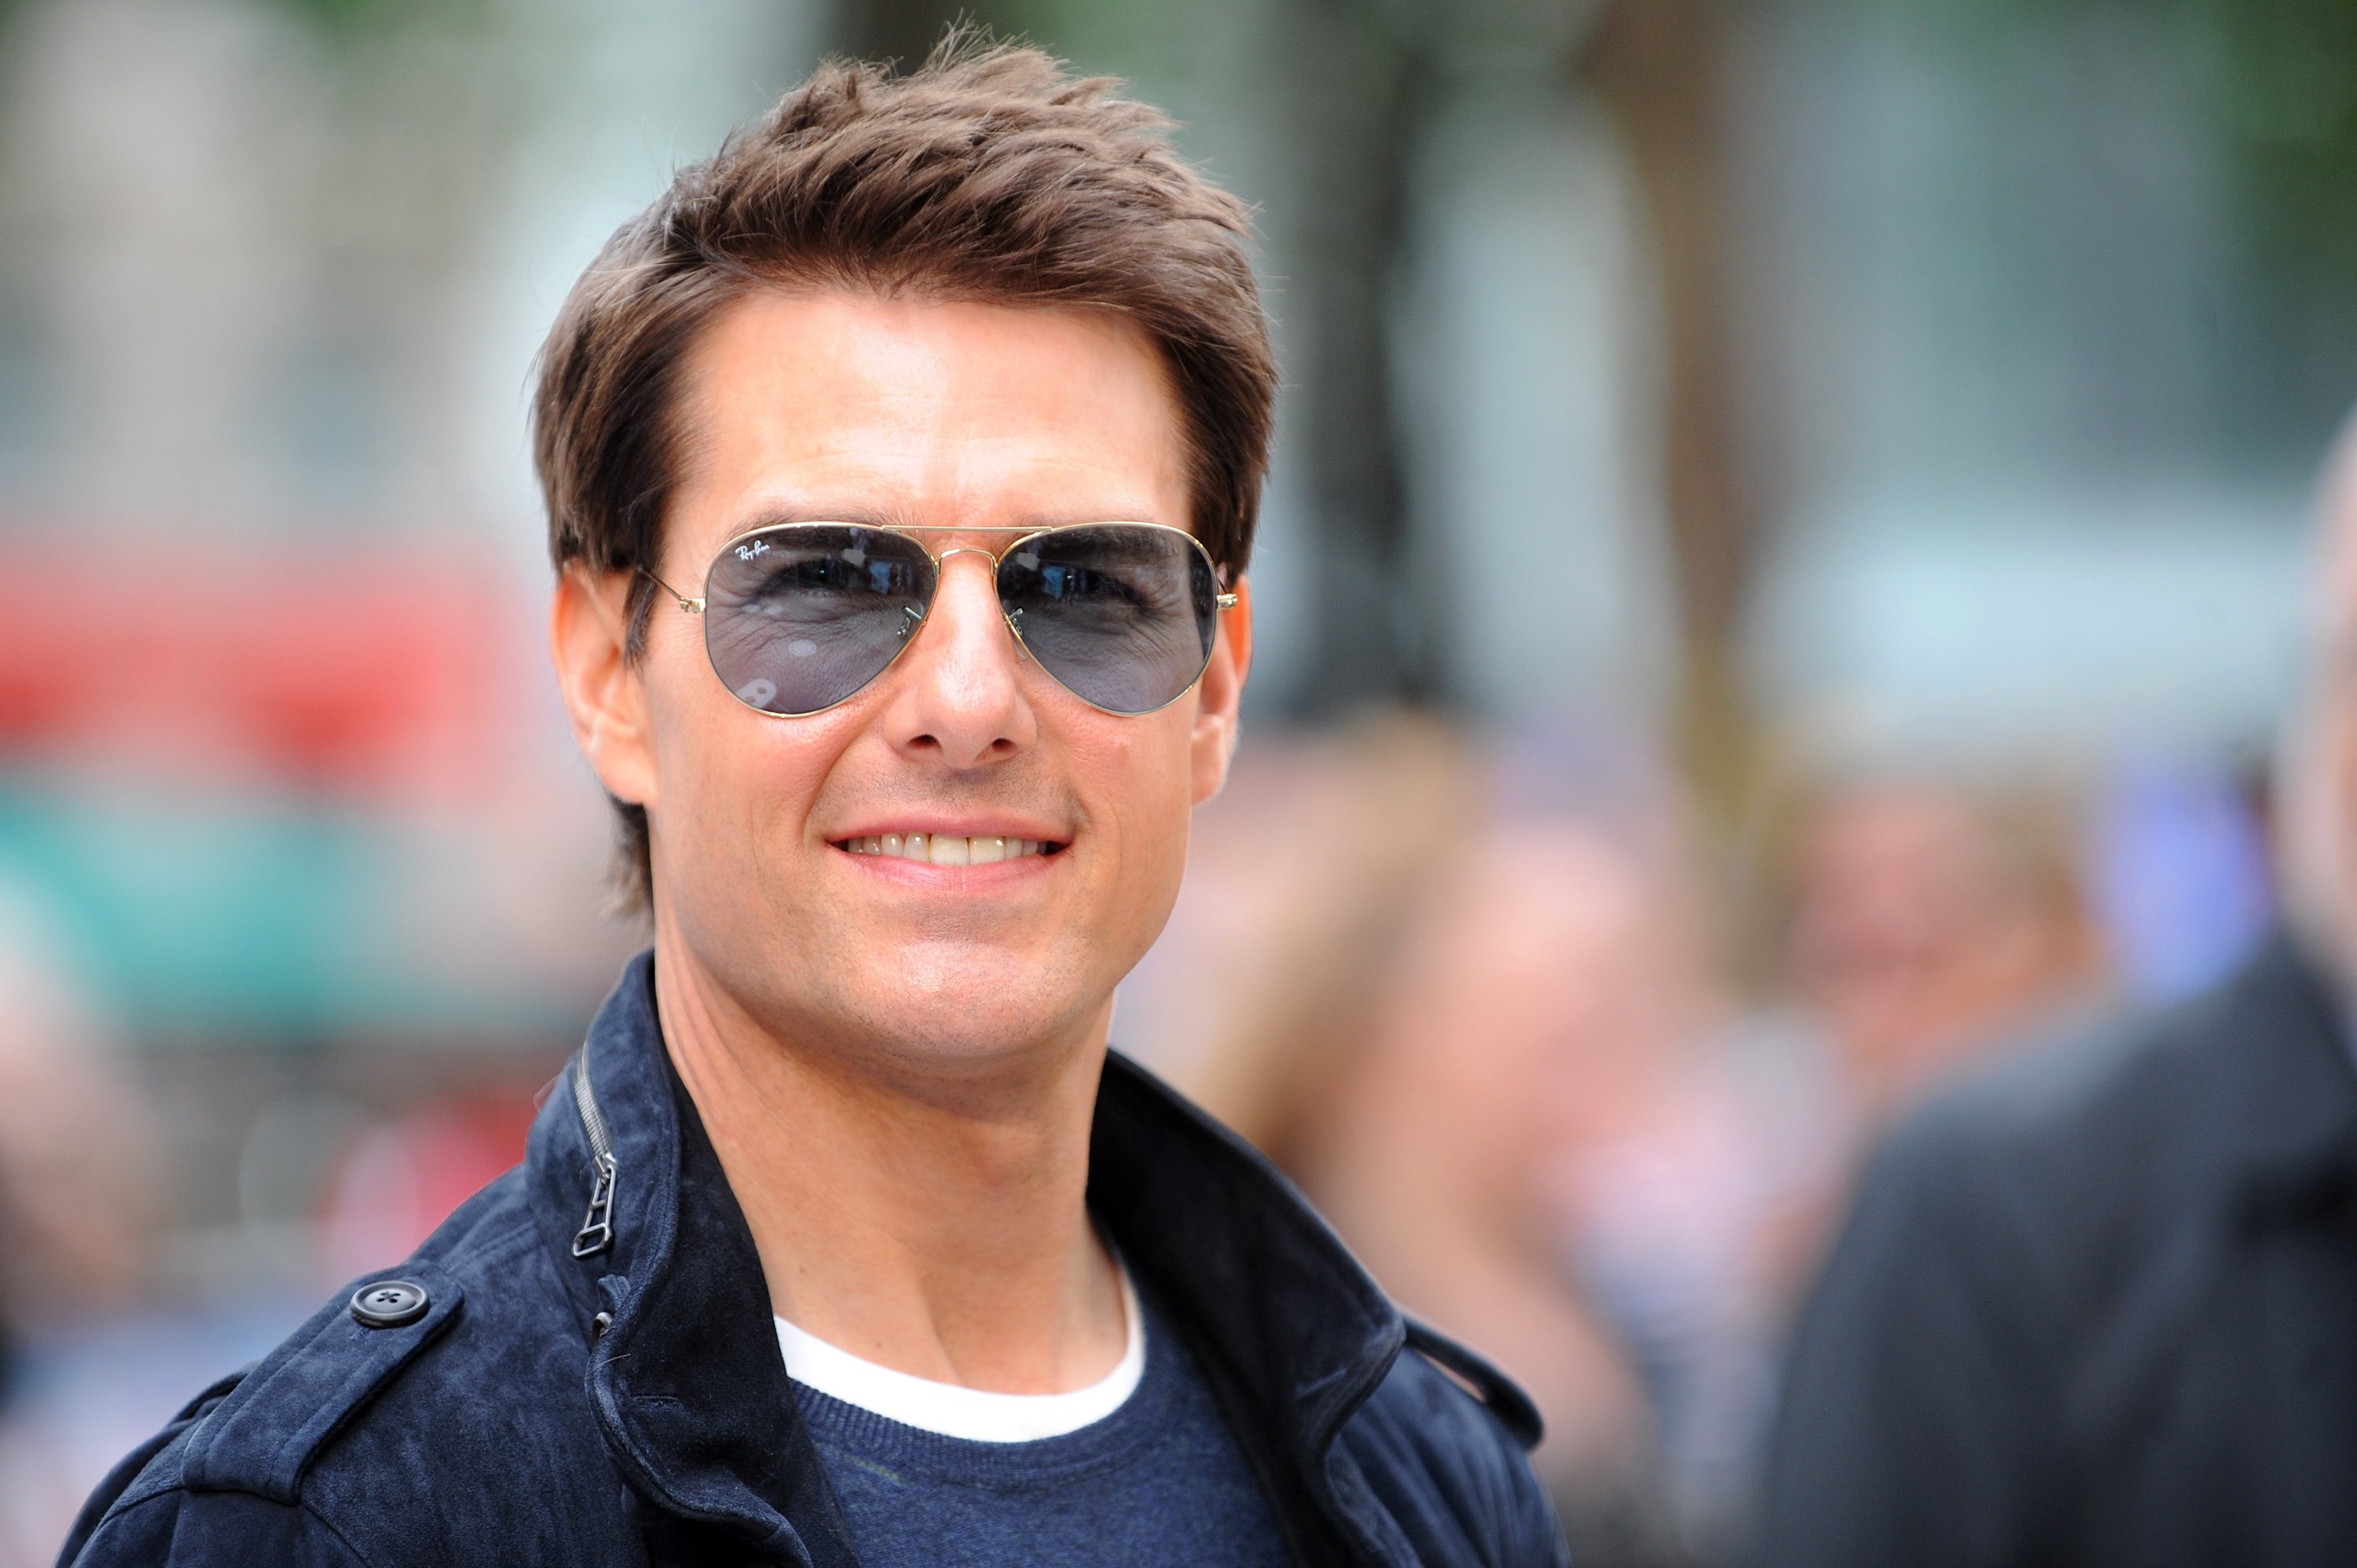 Tom Cruise attends the premiere of "Rock Of Ages" at Odeon Leicester Square on June 10, 2012. | Photo: Getty Images